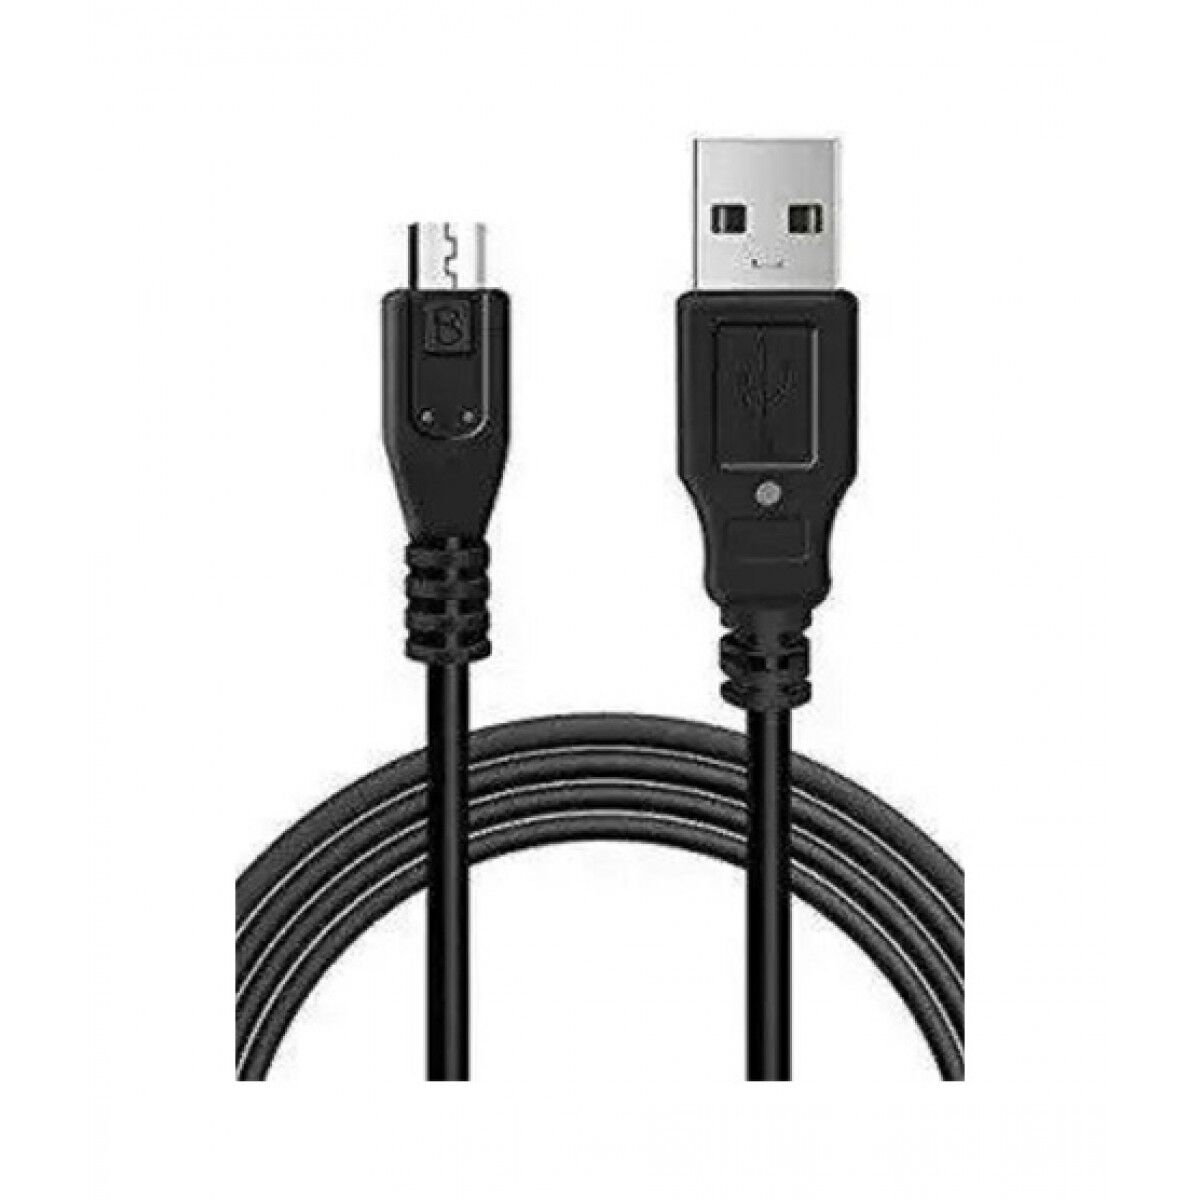 Micro Usb Data Cable freeshipping - SmartTech Deals